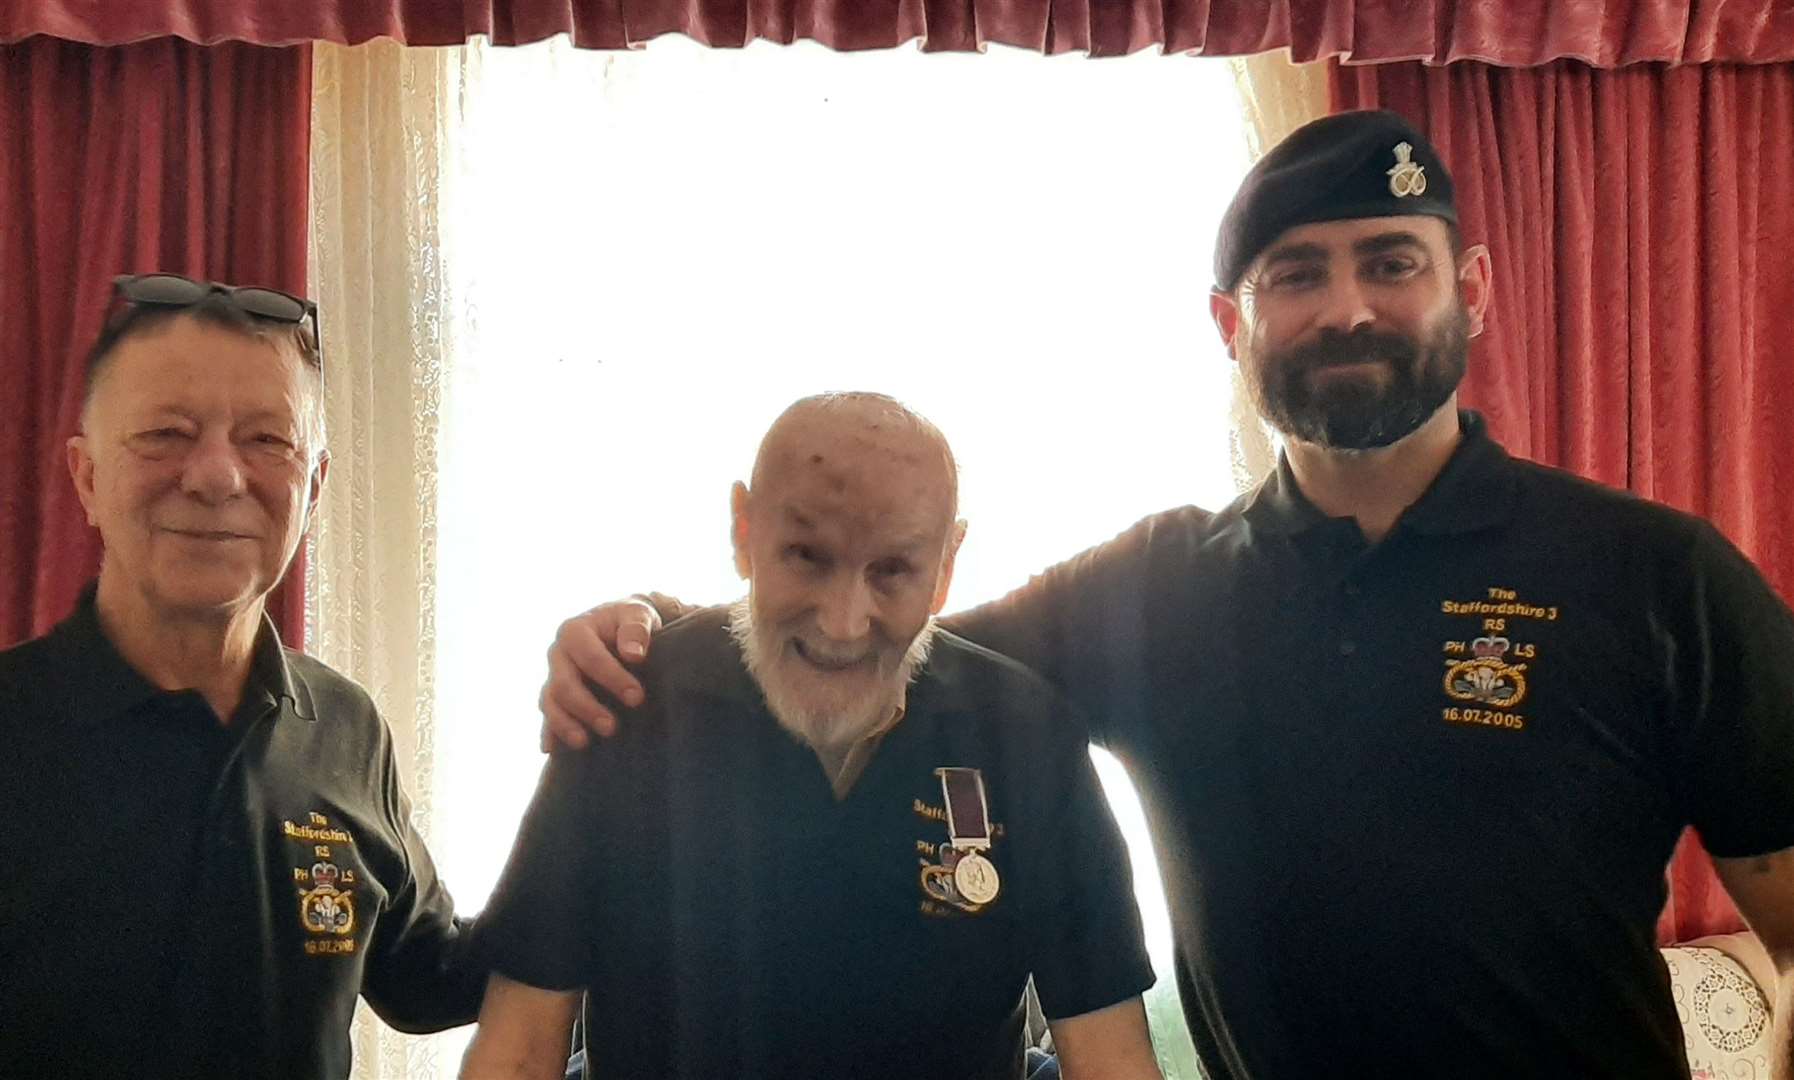 Ronald Brown hit the headlines after being reunited his lost Army medals. Pictured with Gordon Moore (left) and Anthony Frith from the Staffordshire Regiment